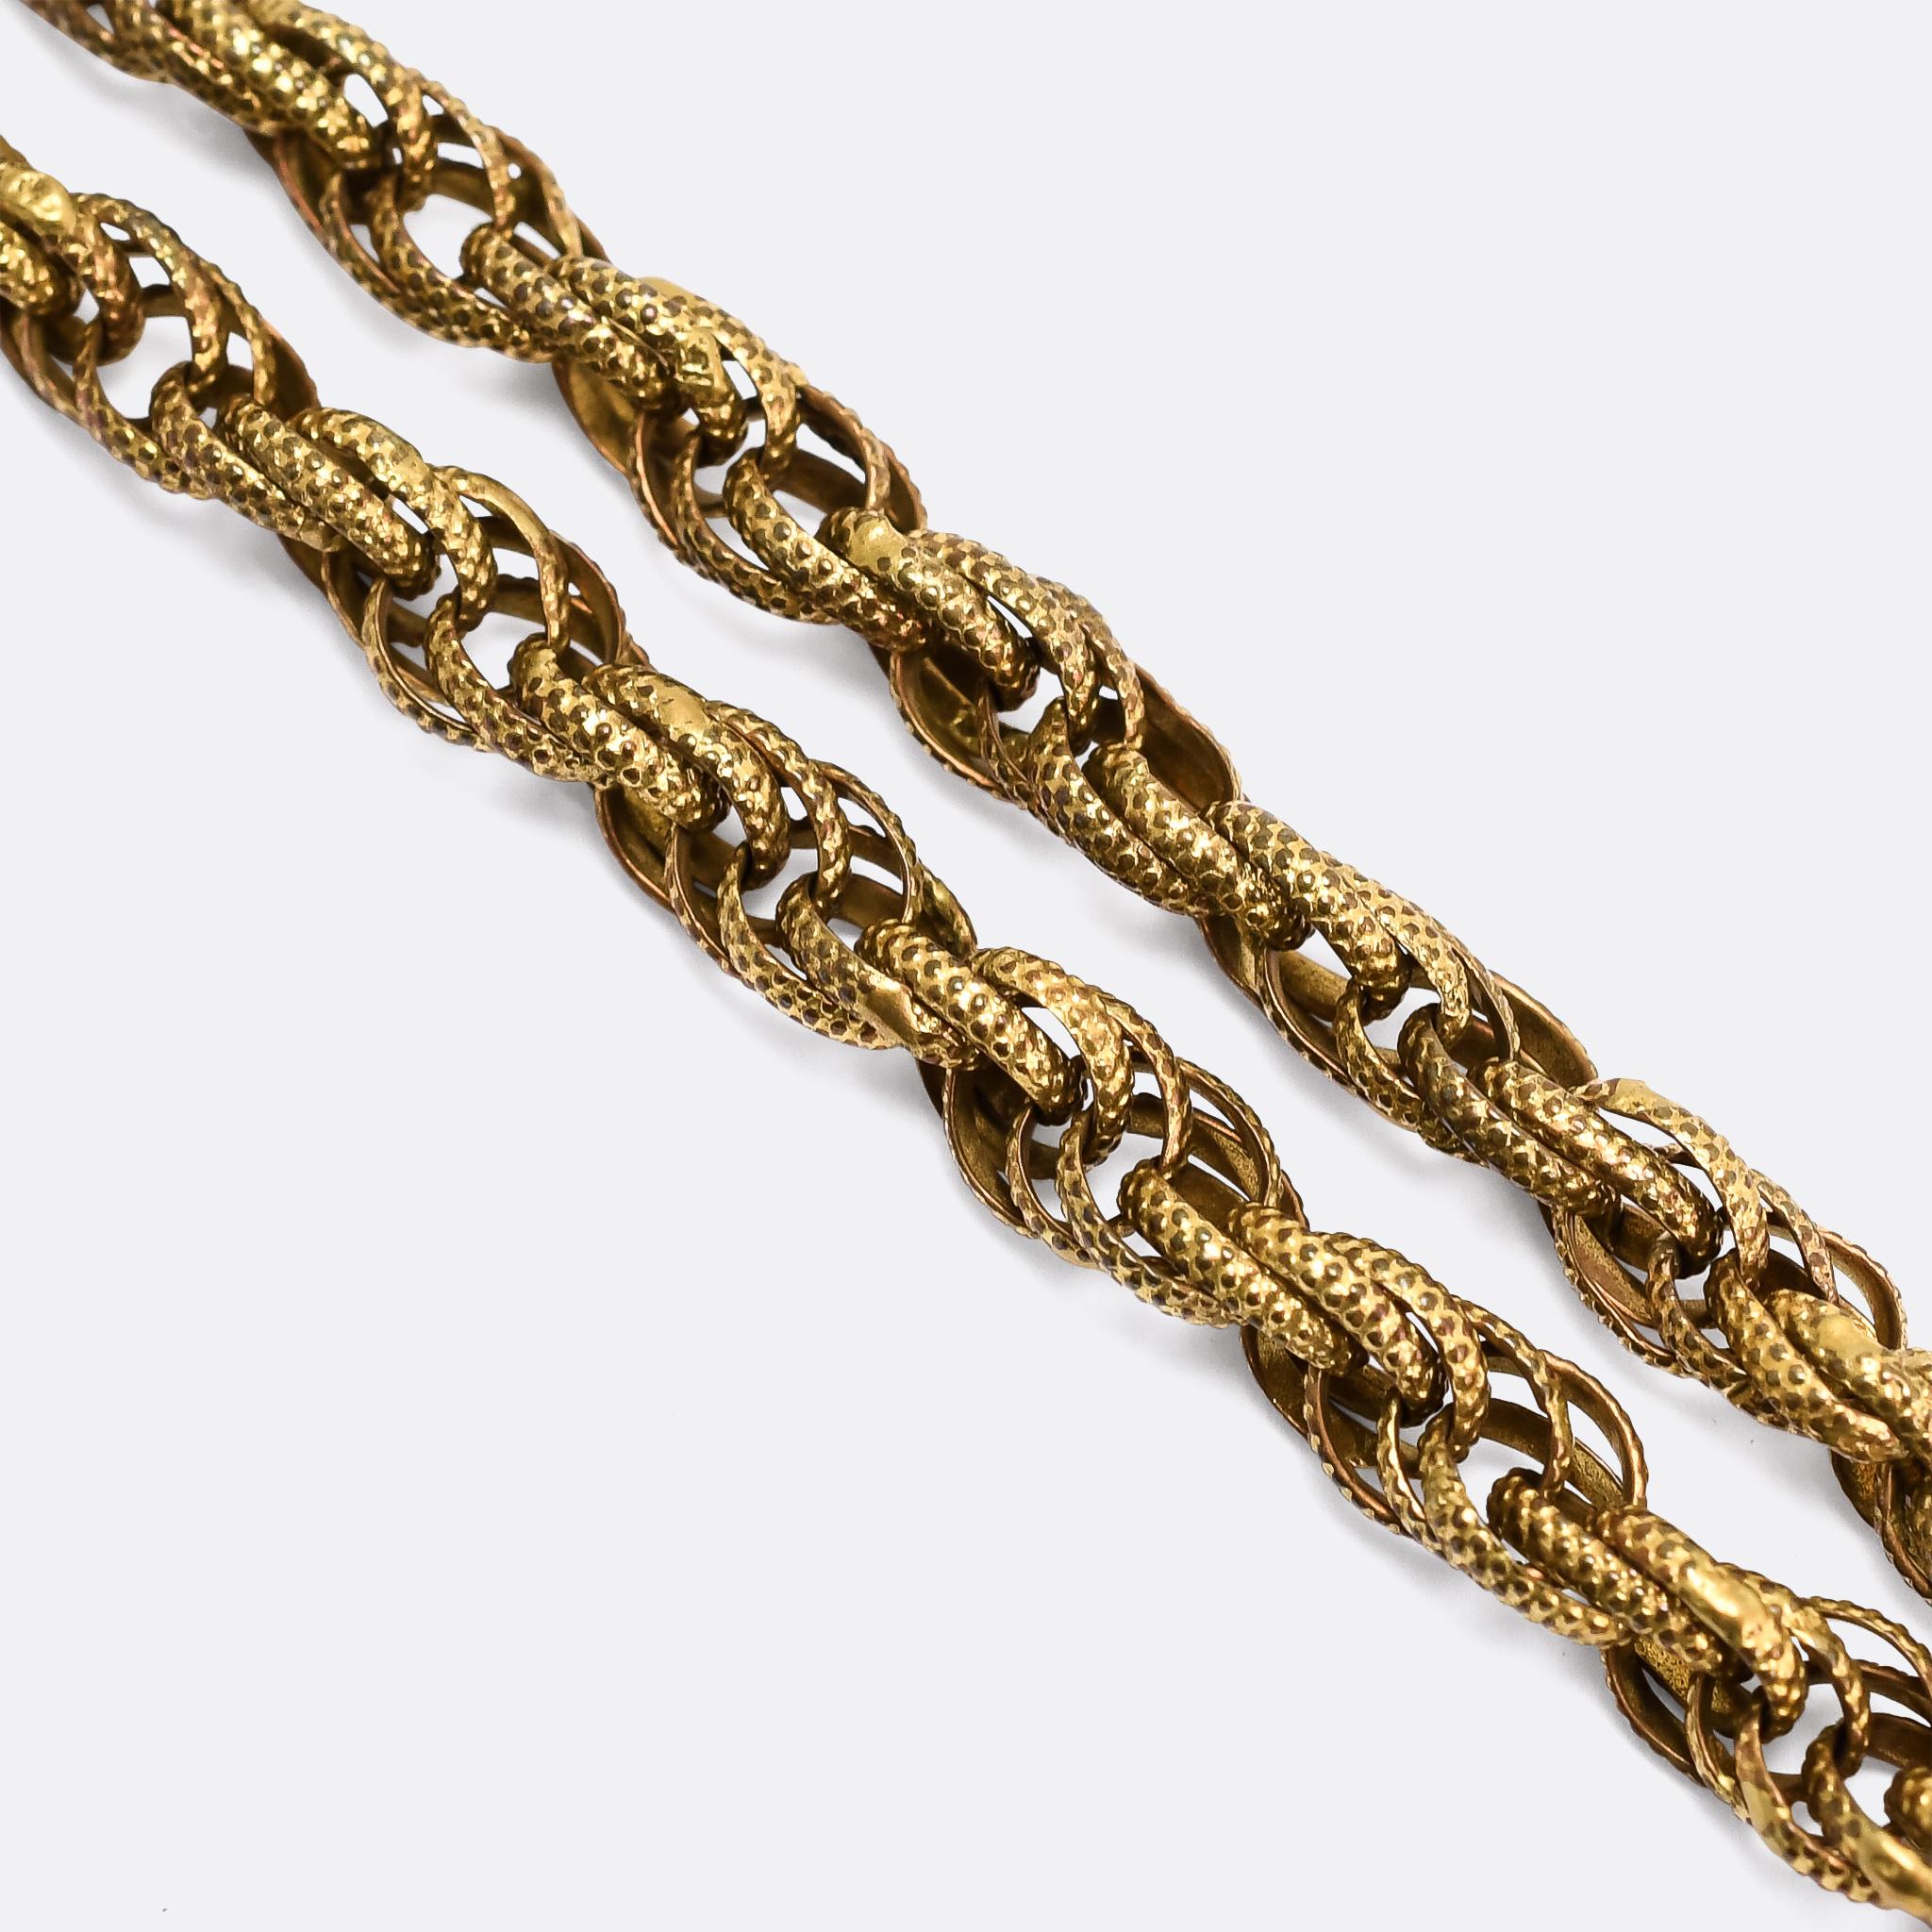 An exquisite Georgian Regency pinchbeck guard chain dating from the early 19th Century, circa 1810. It's beautifully made, with textured oval links that interlink to create a spiral effect, and an elaborate barrel clasp with cannetille embellishment